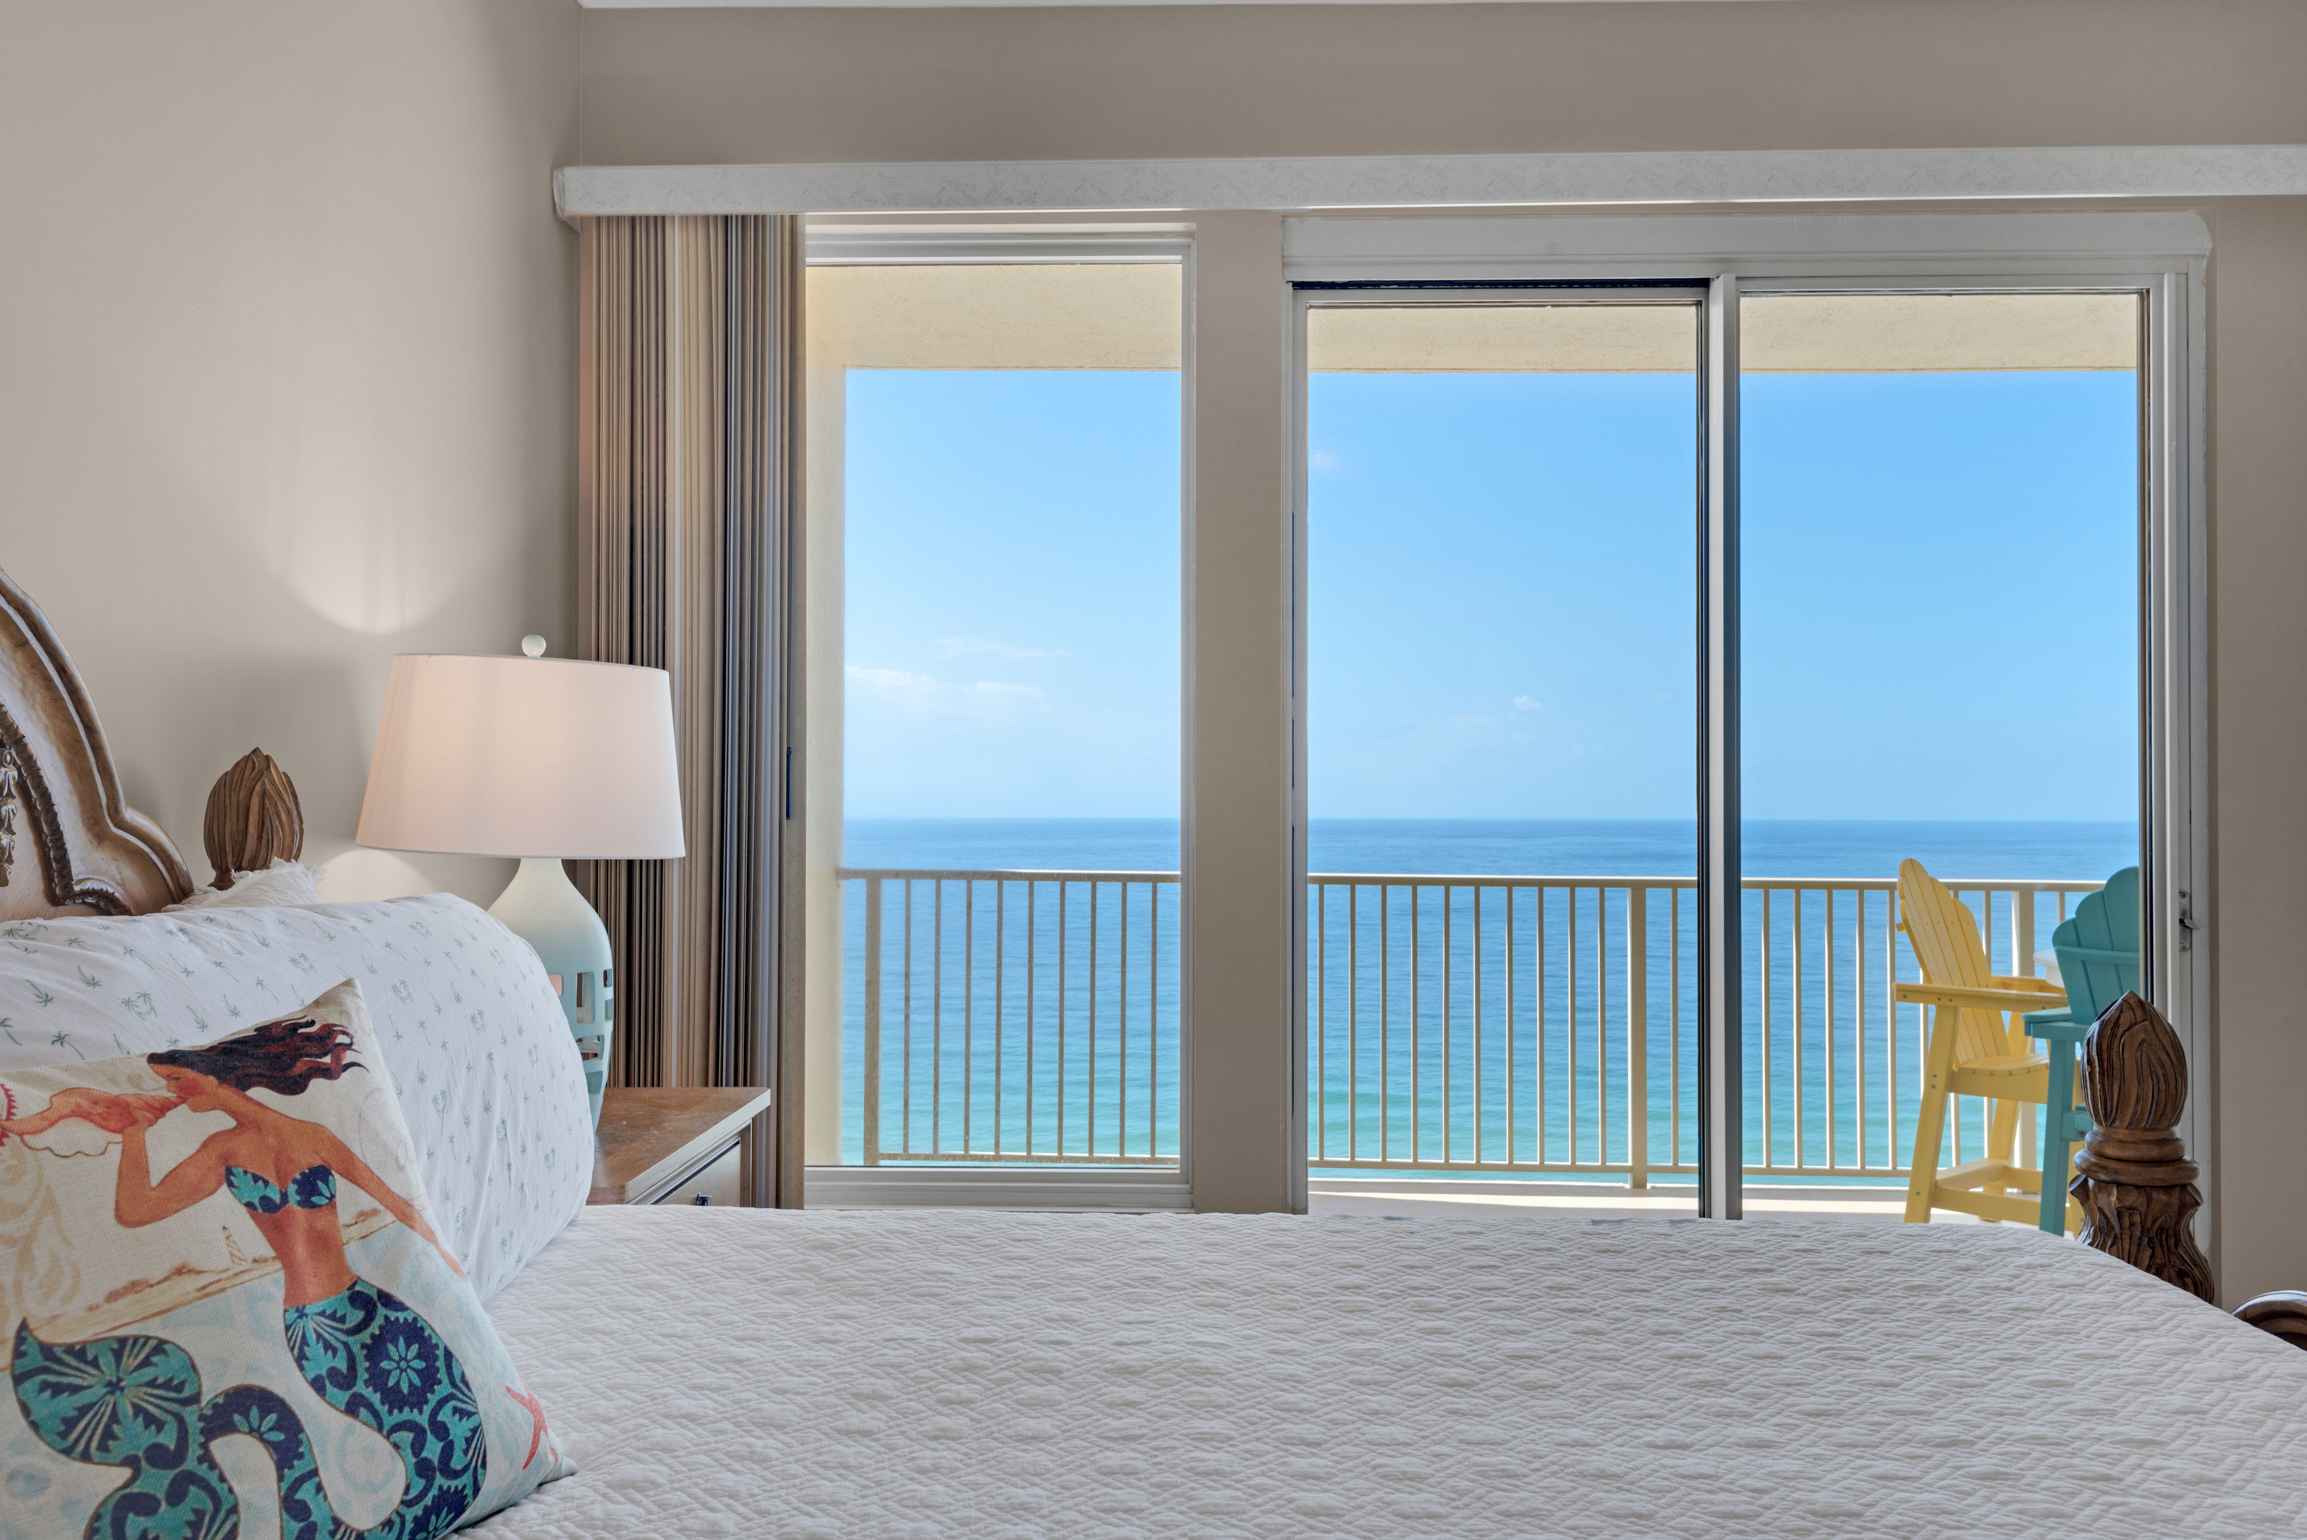 Relax and take in the views from bed!